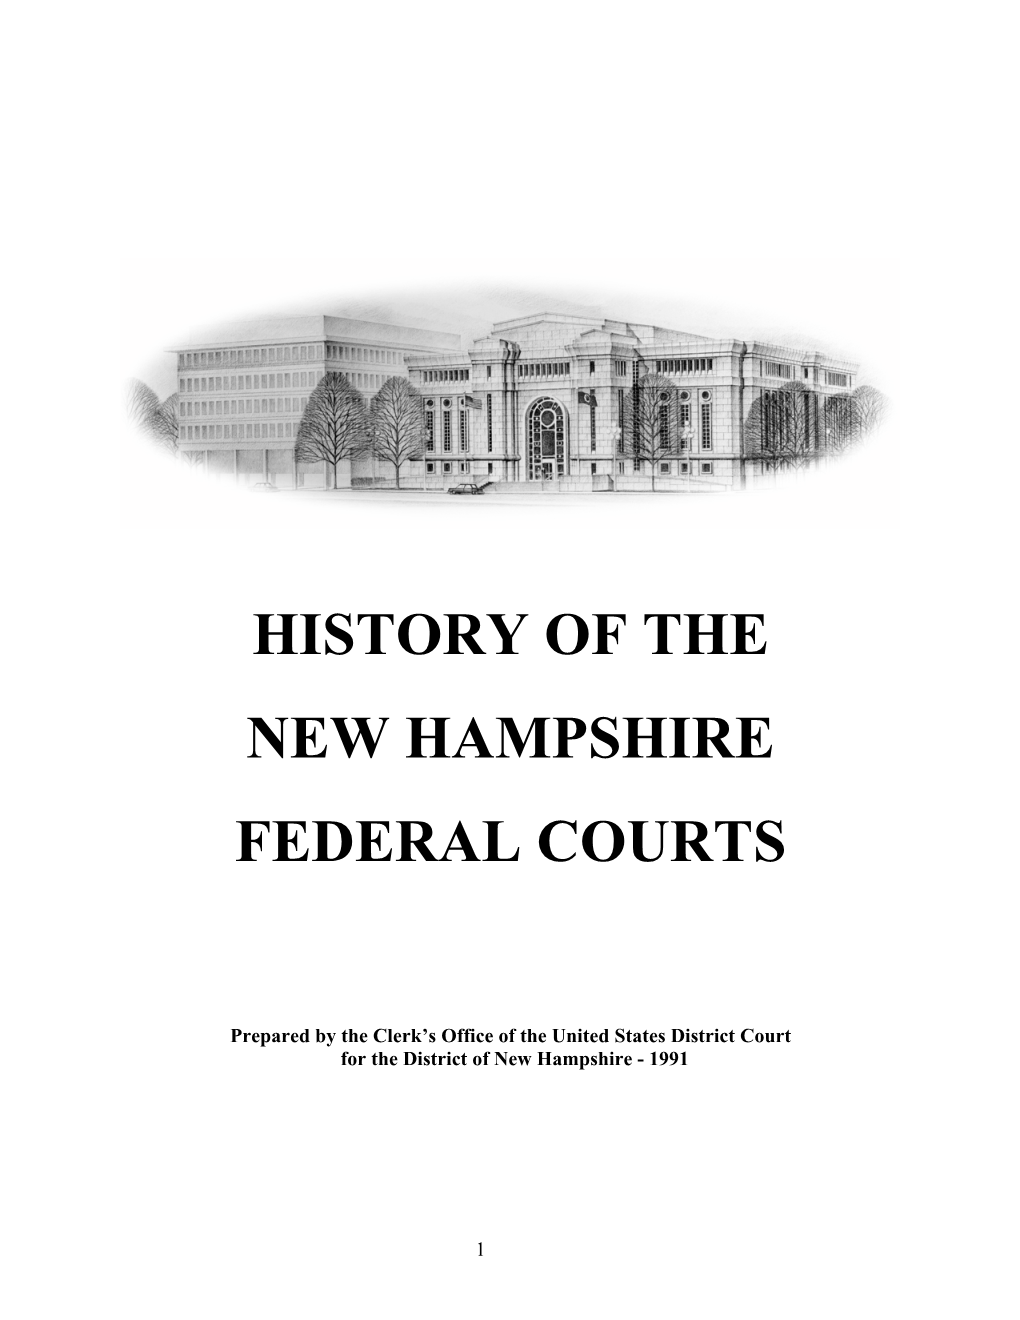 History of the New Hampshire Federal Courts